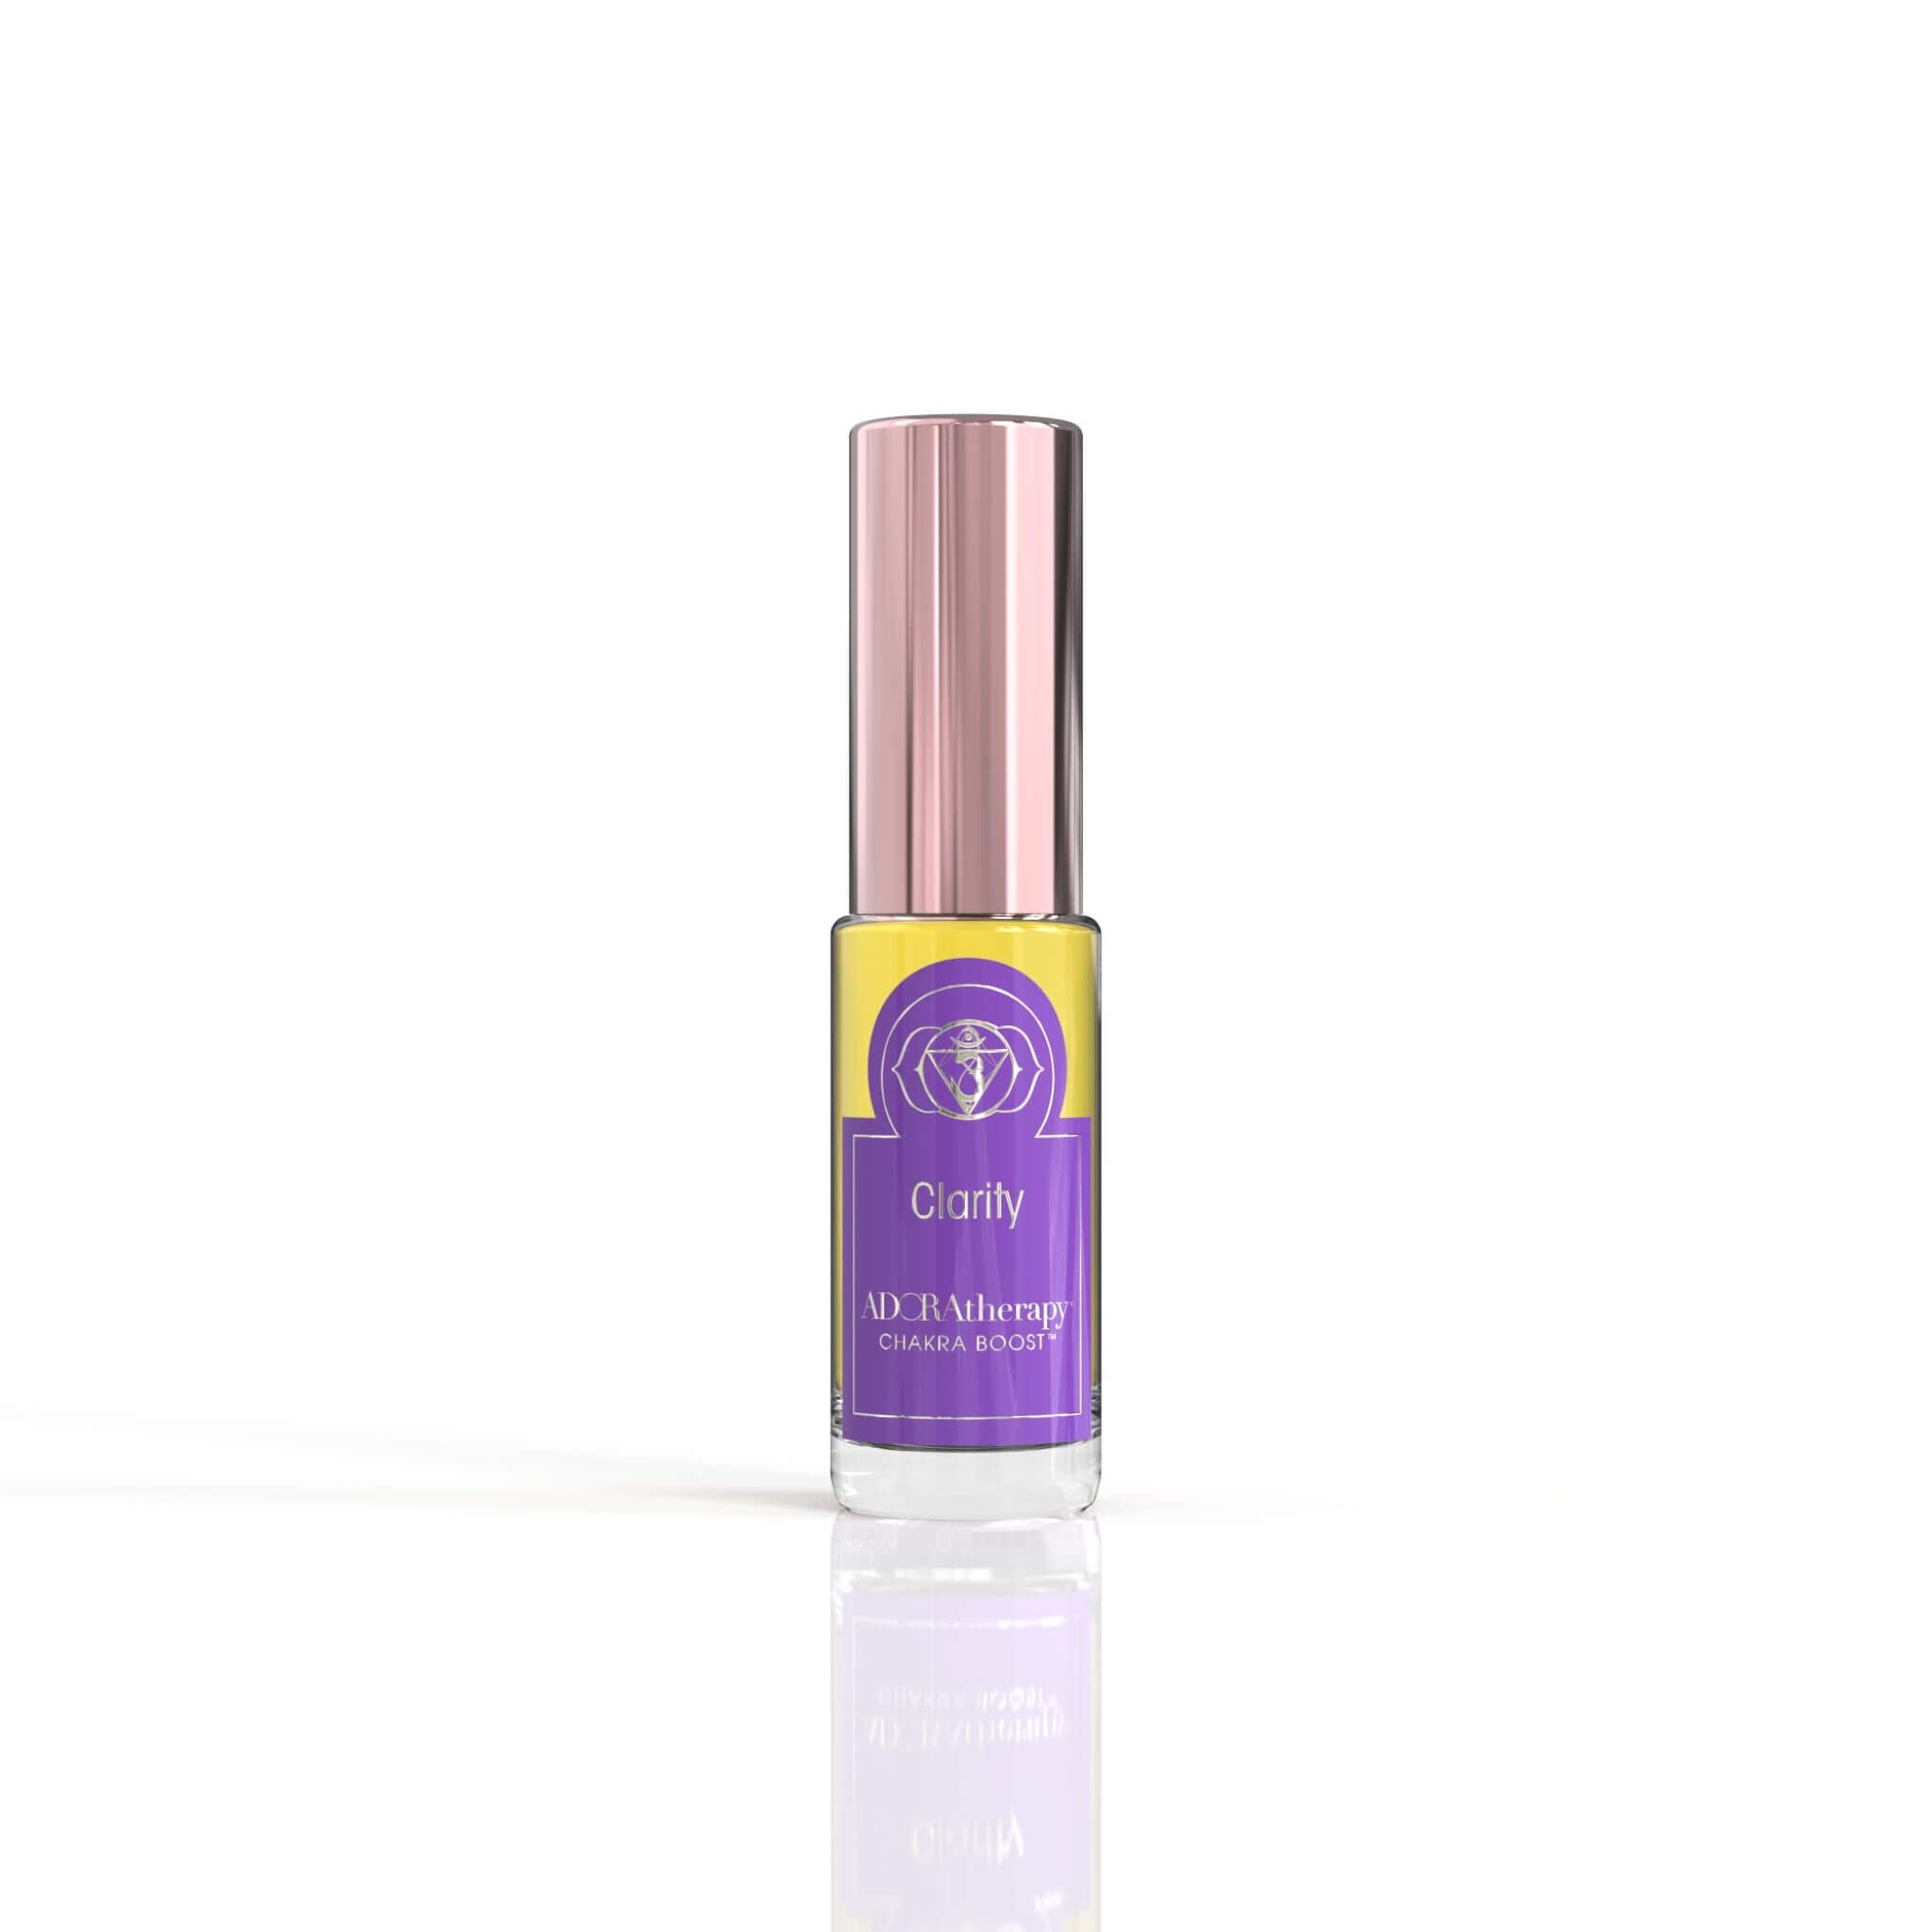 Chakra 6 Clarity Roll On Perfume Oil by Adoratherapy.com